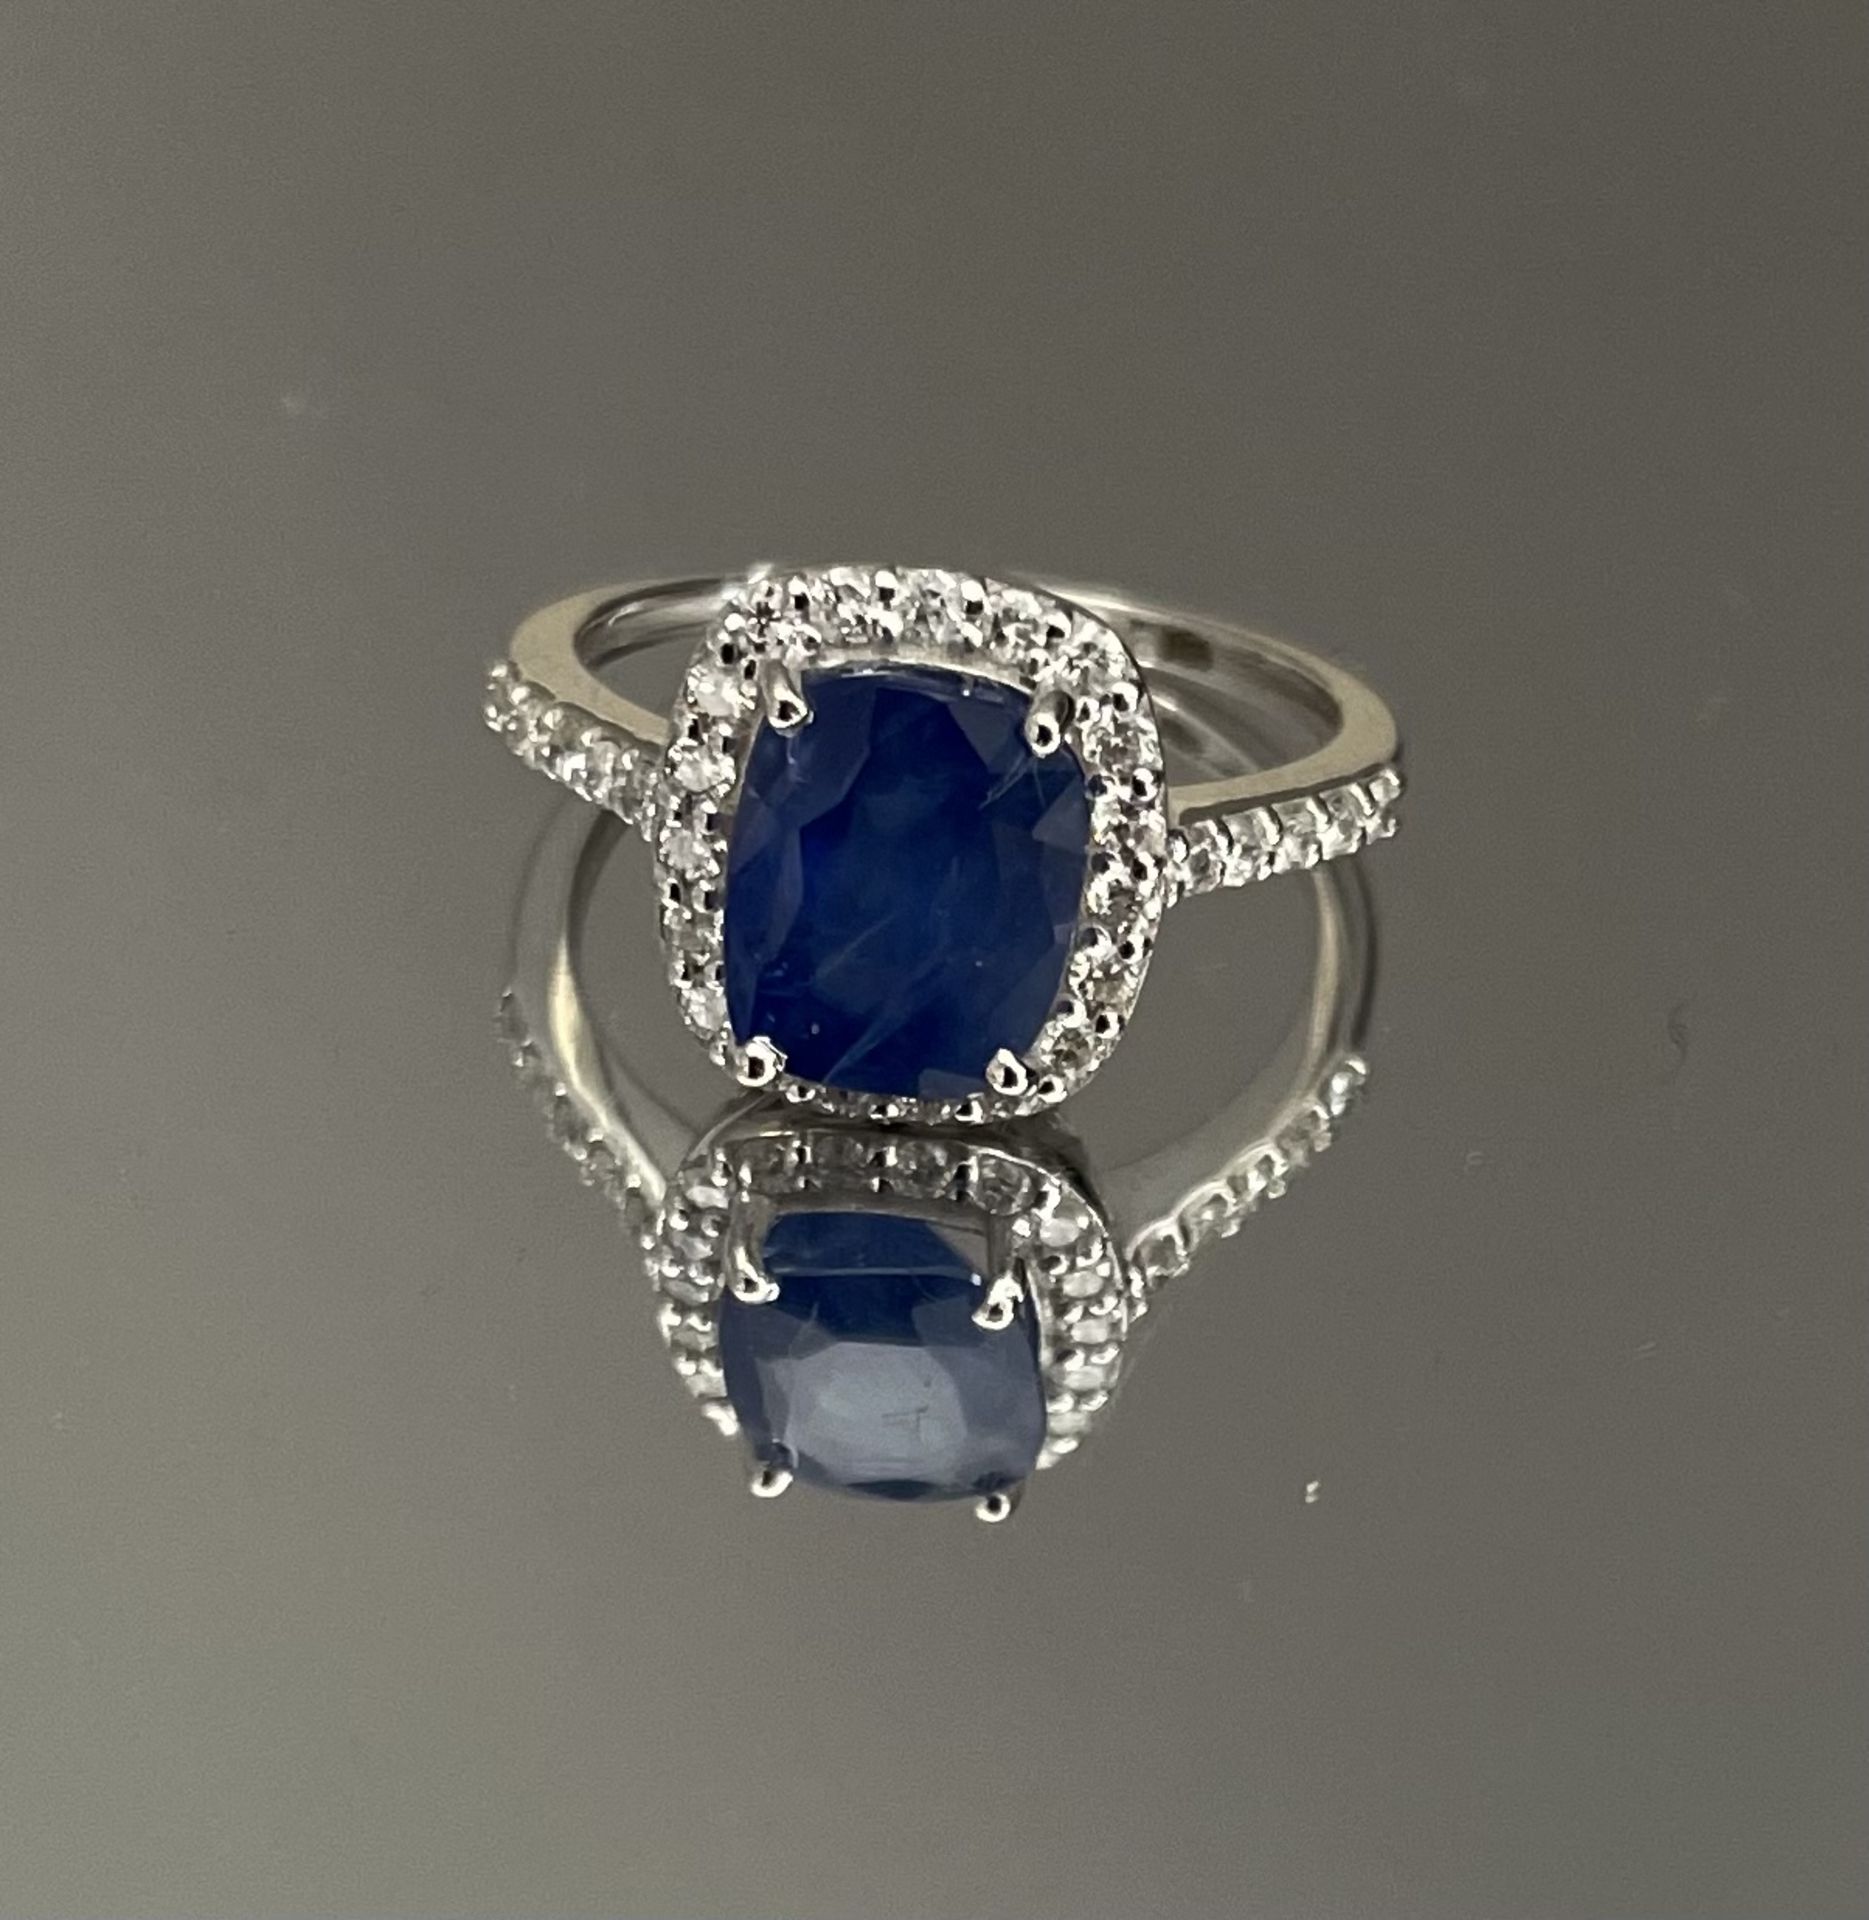 Beautiful Natural Ceylon Blue Sapphire With Natural Diamonds And 18k White Gold - Image 3 of 6